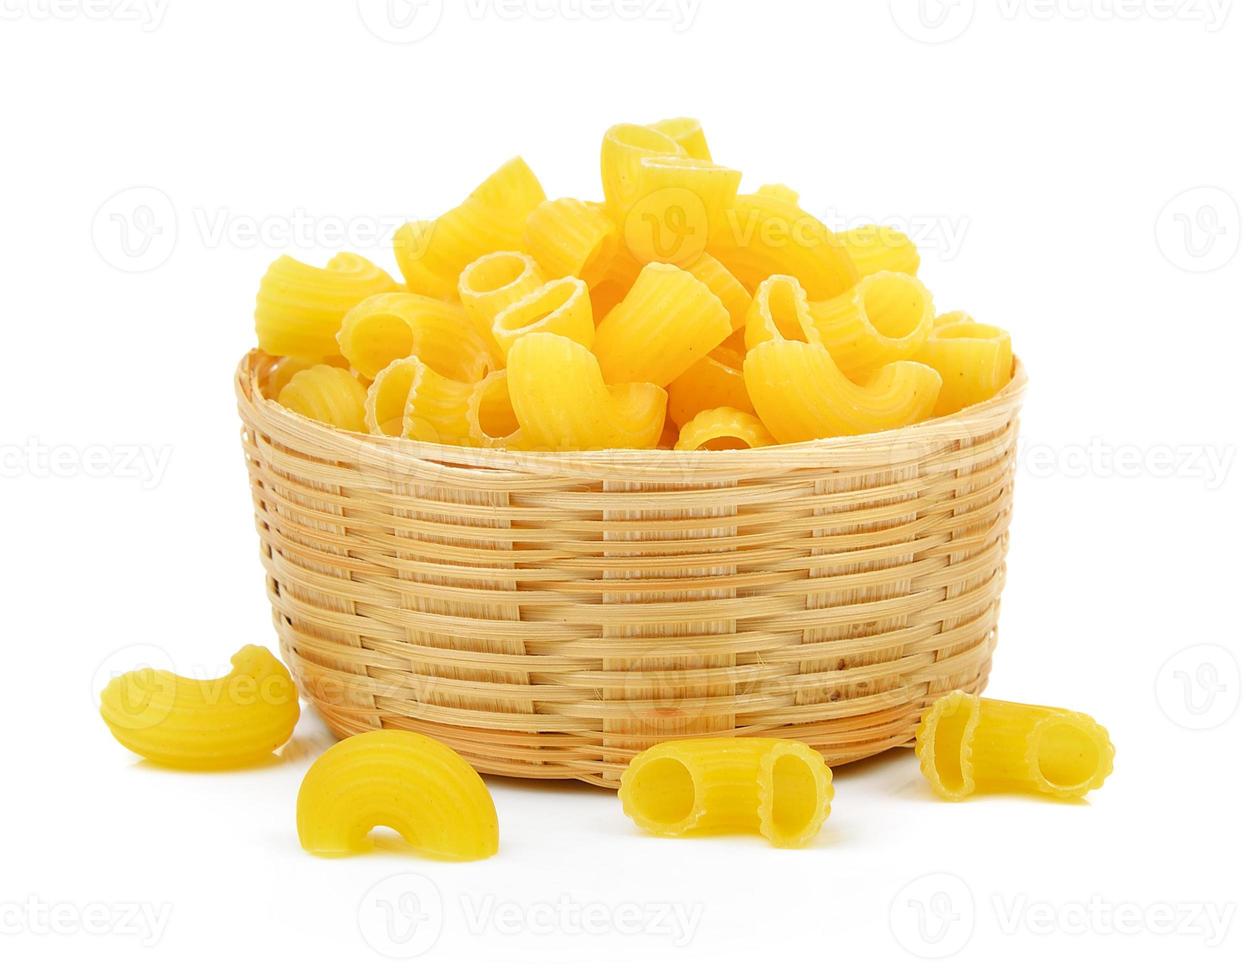 dry macaroni in the basket on white background photo